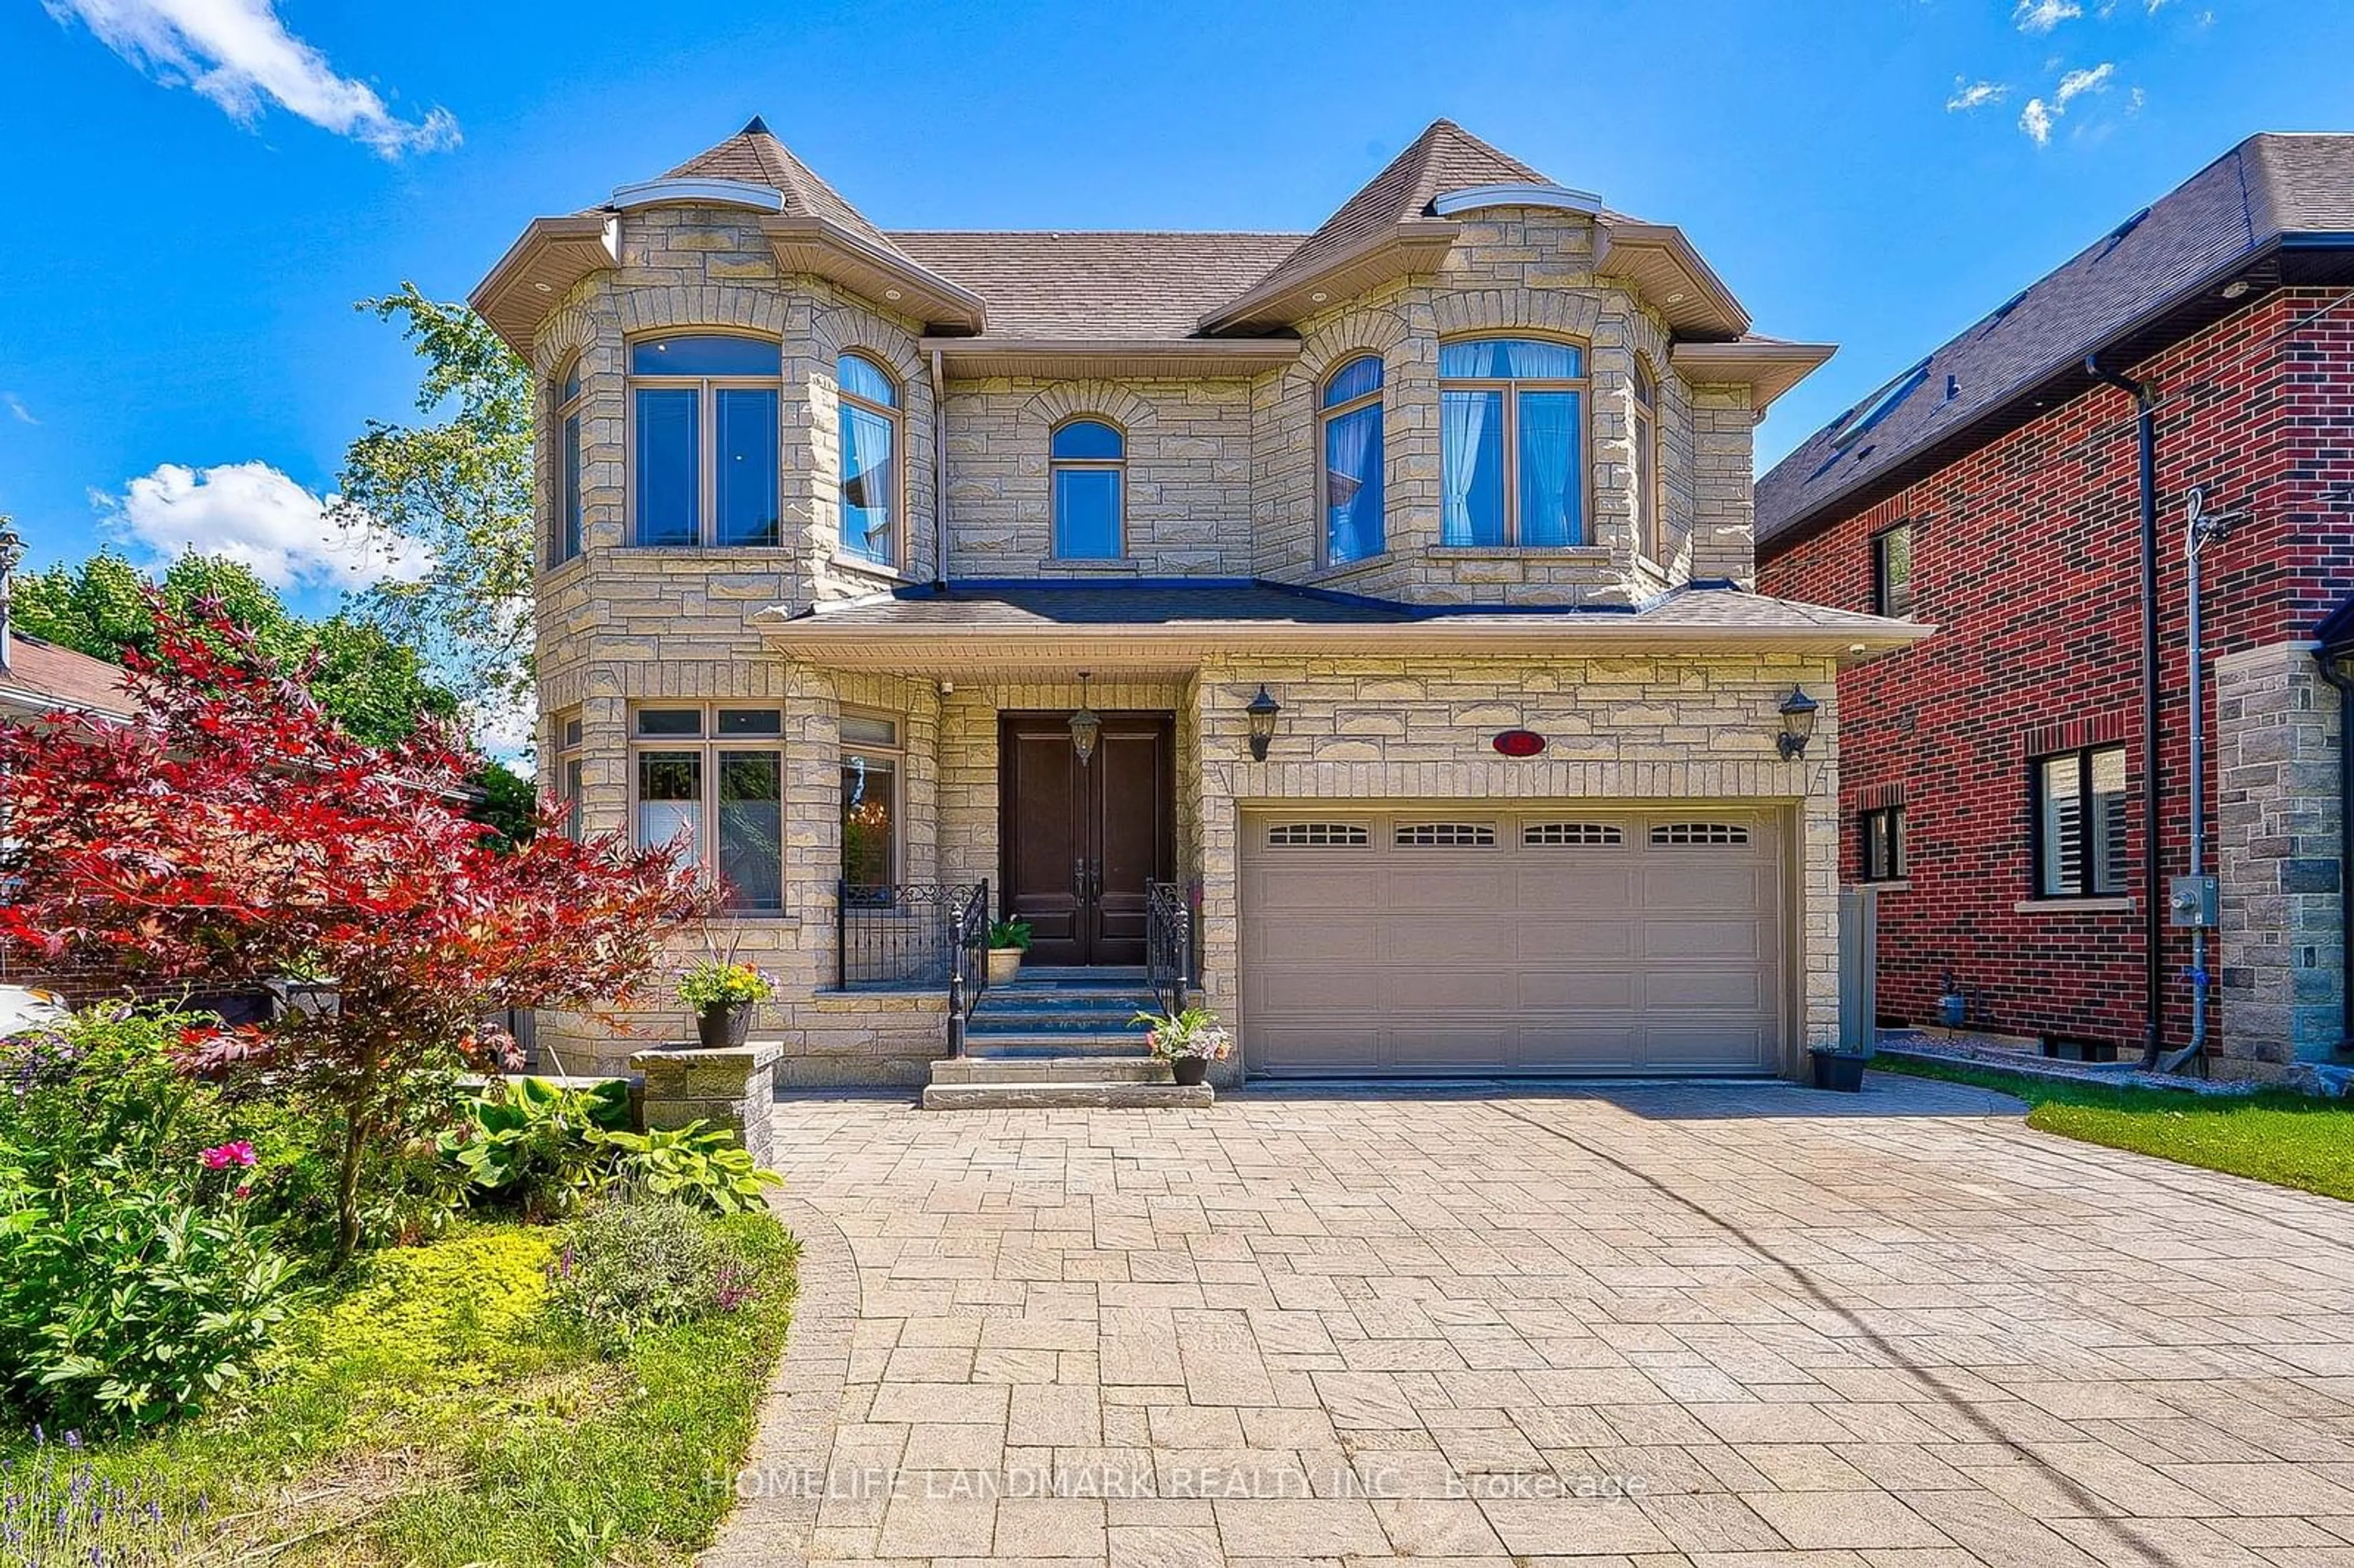 Home with brick exterior material for 426 Centre St, Richmond Hill Ontario L4C 1B7